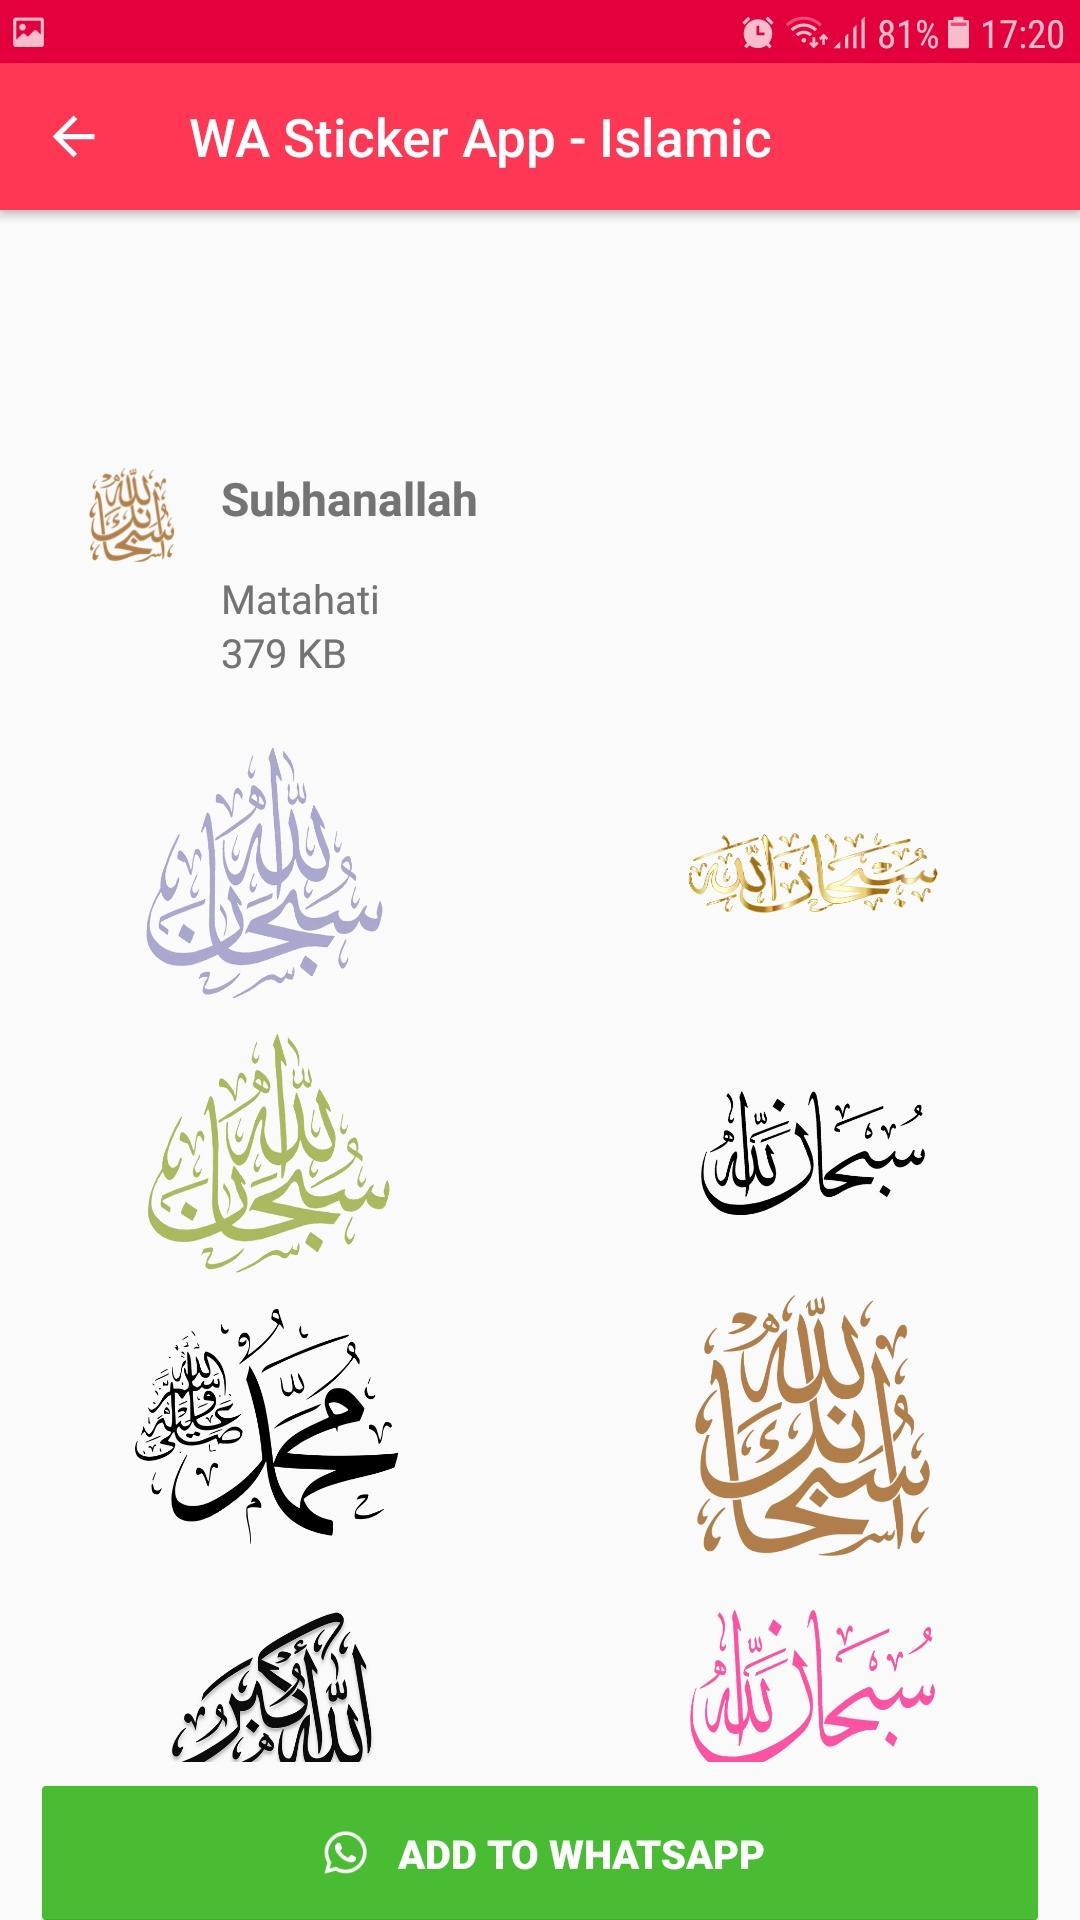 Islamic Sticker Whatsapp For Wastickerapps For Android Apk Download